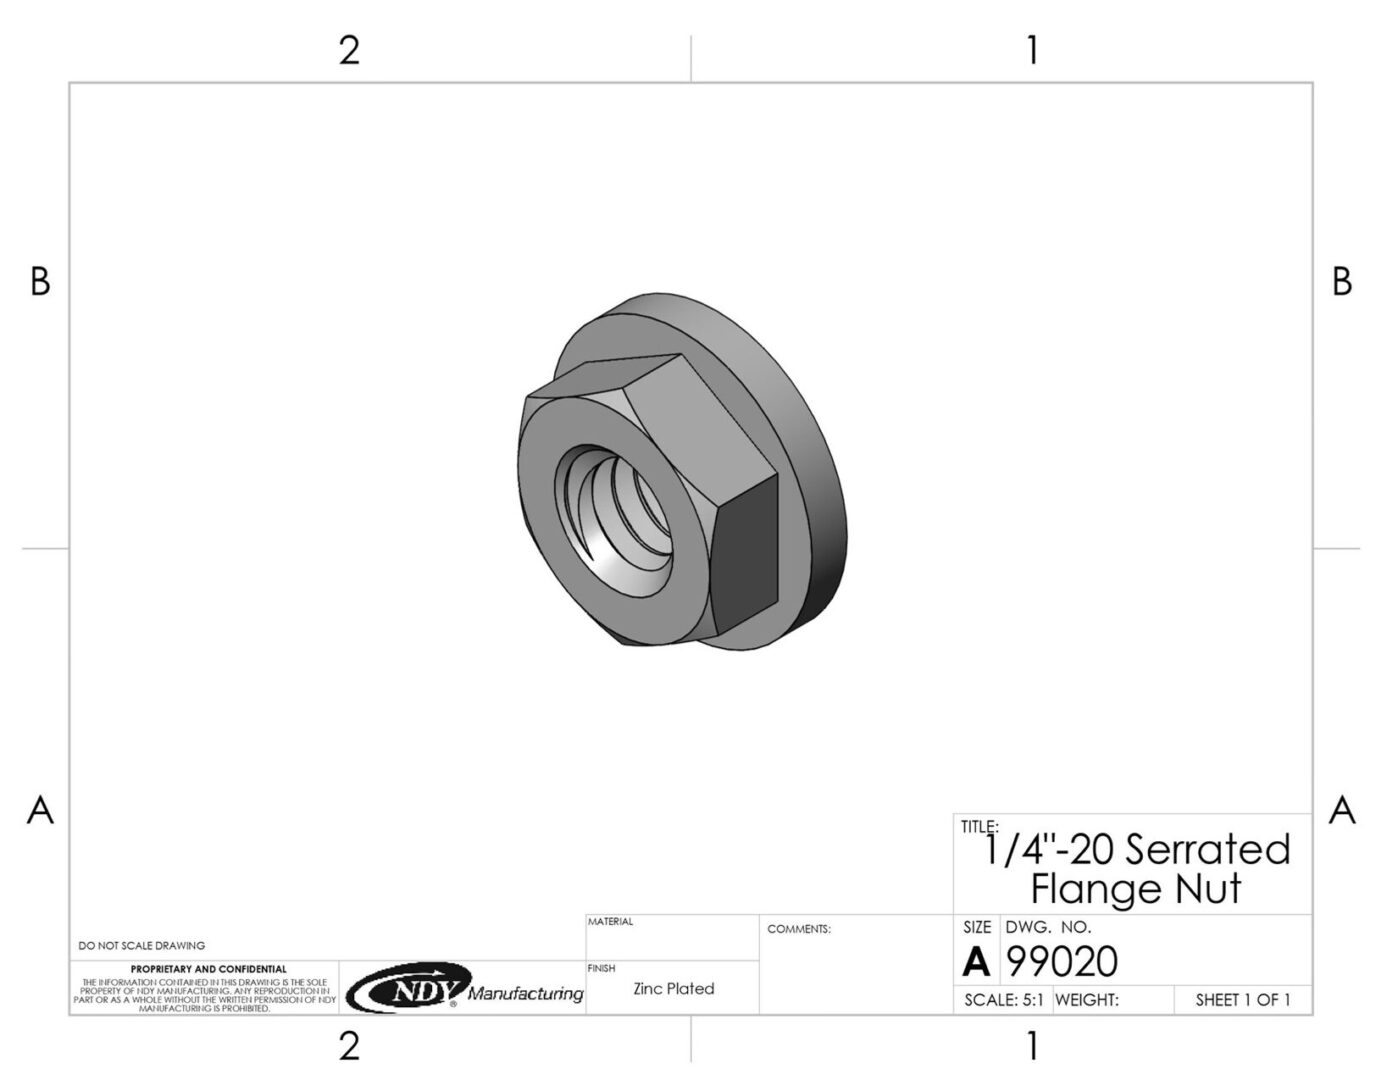 A drawing of a 1/4"-20 Serrated Flange Nut.